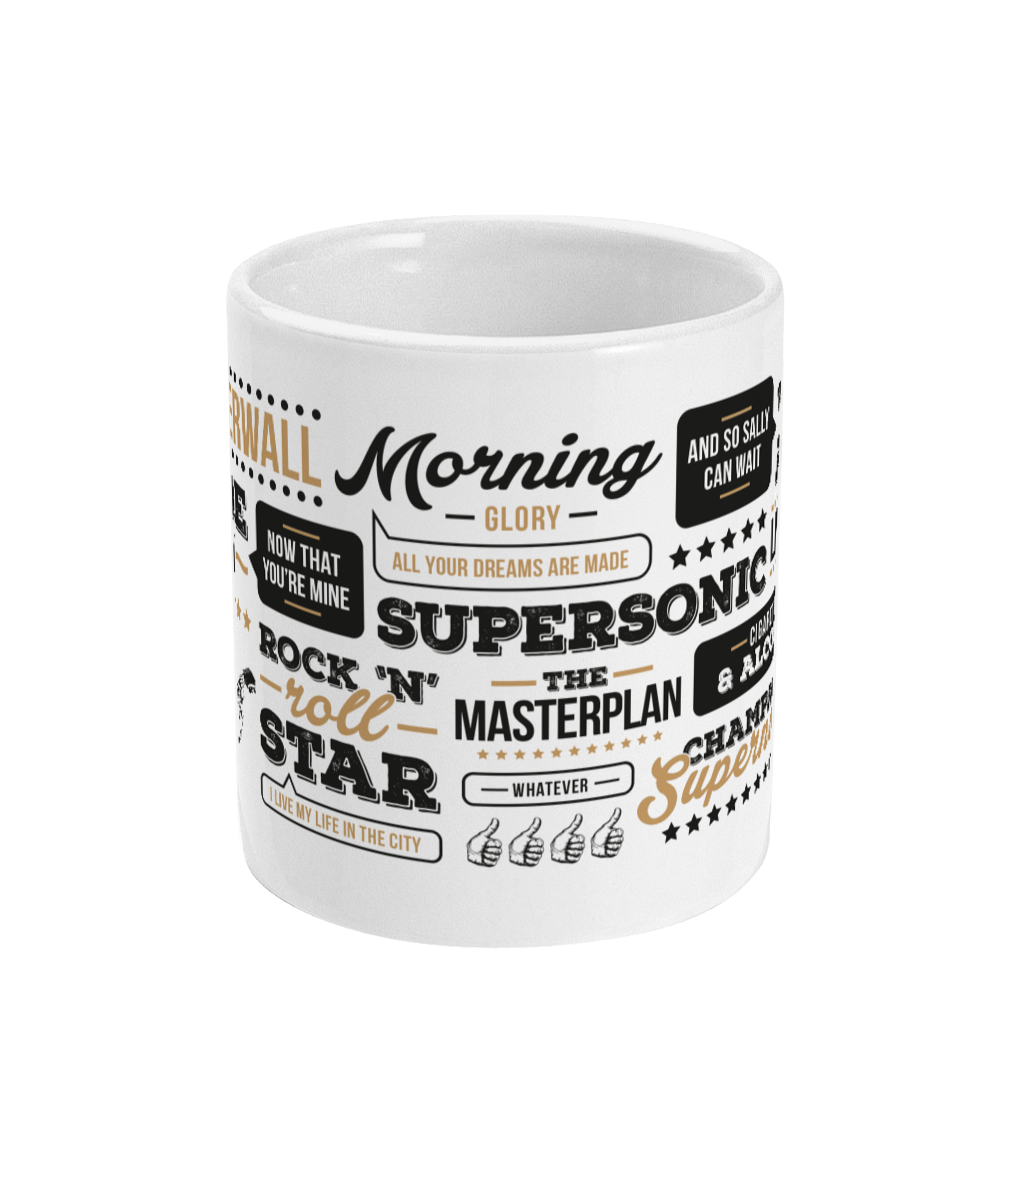 High Quality 11oz mug, celebrating the popular band Oasis.  Designed & made in the UK. Perfect for Oasis fans.